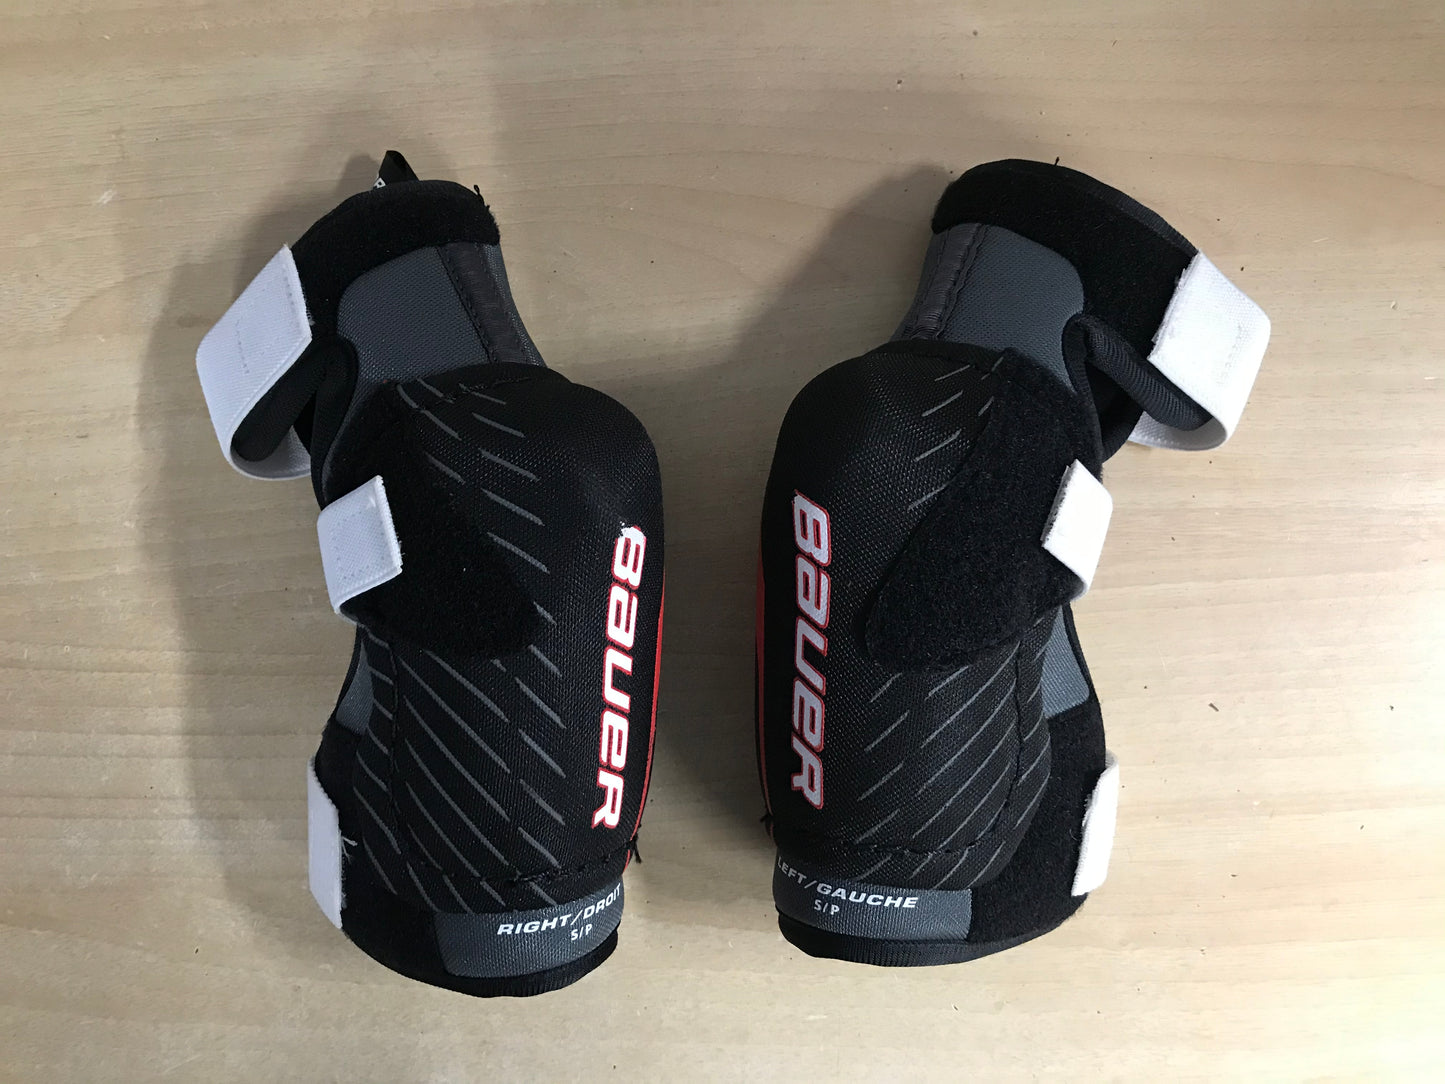 Hockey Elbow Pads Child Size Junior Small 6-8 Bauer Lil Sport New Demo Model